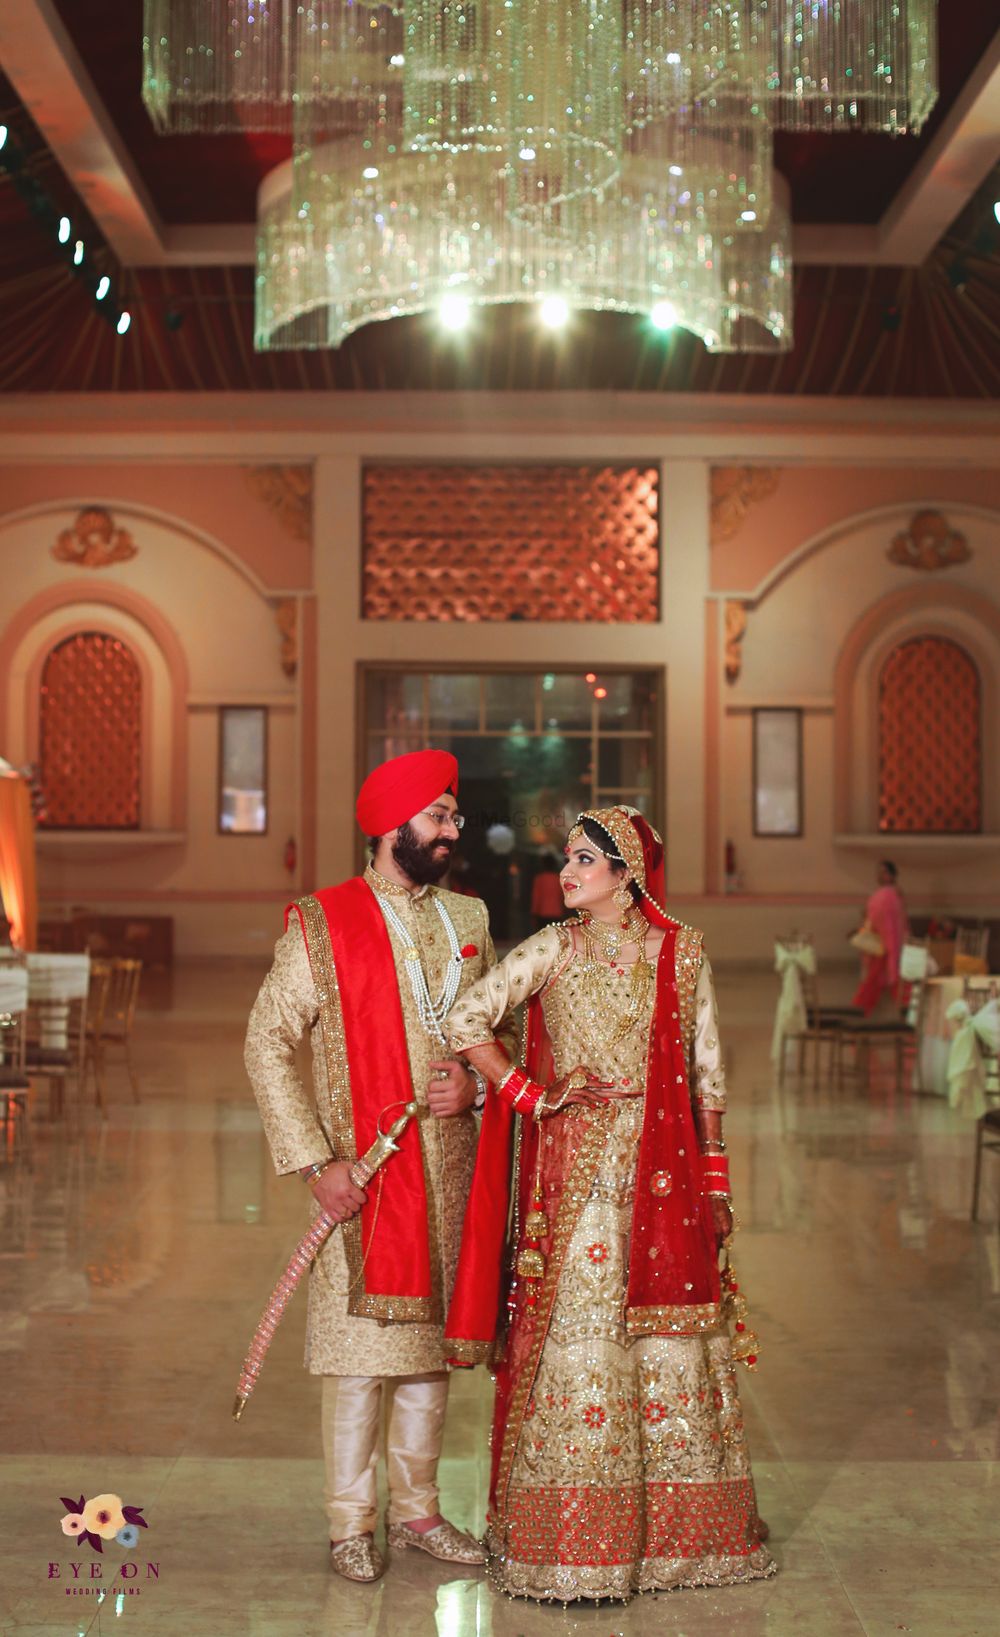 Photo From Eye On Production - Best Couple Portrait Photography Chandigarh - By EyeOn Production